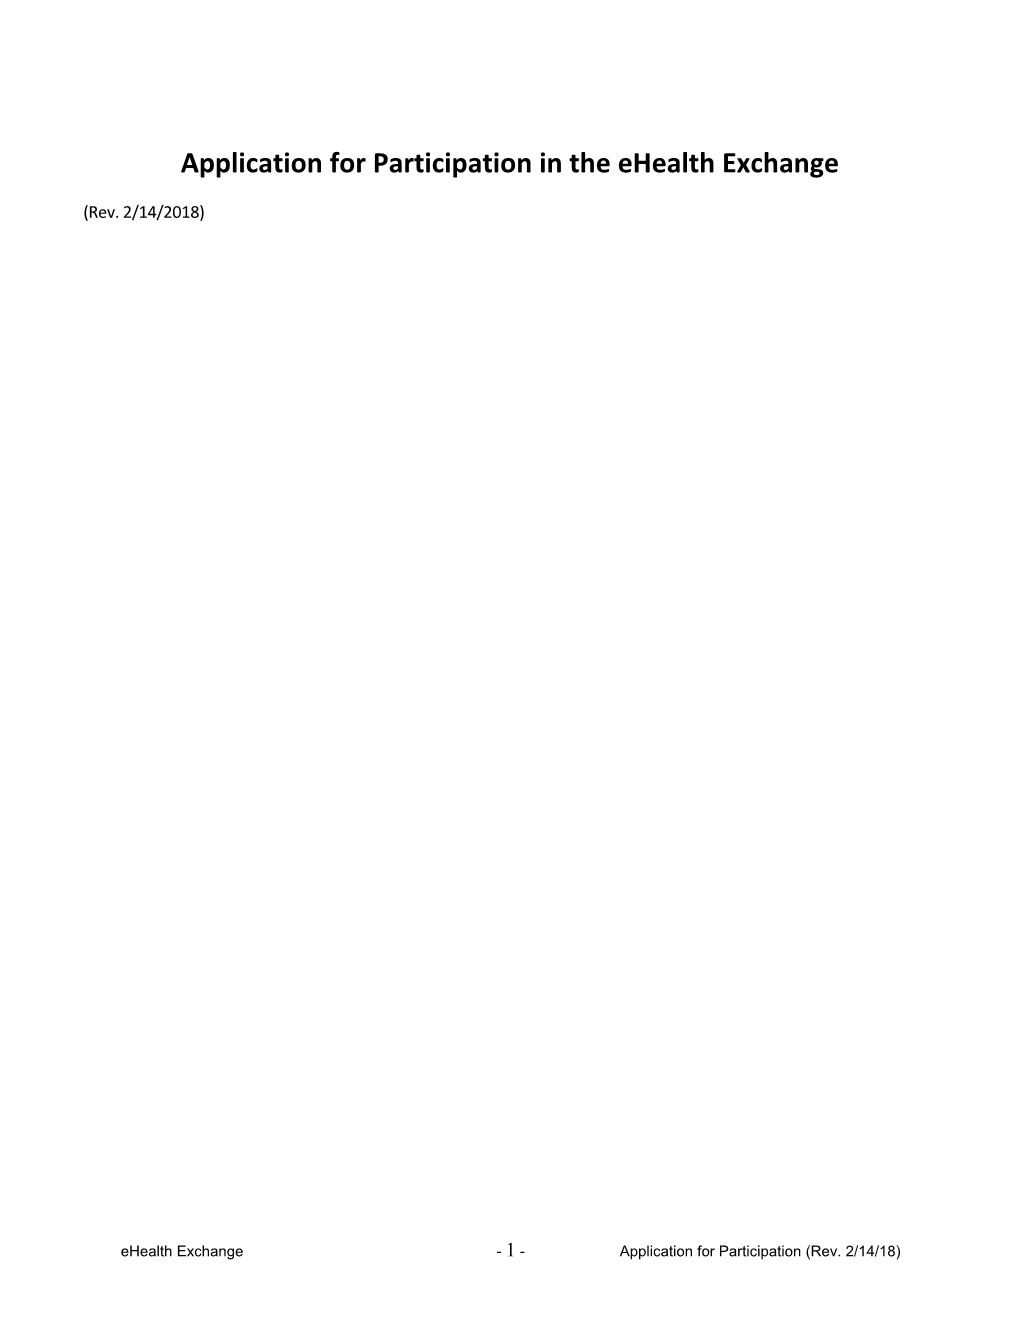 Application for Participation in the Ehealth Exchange